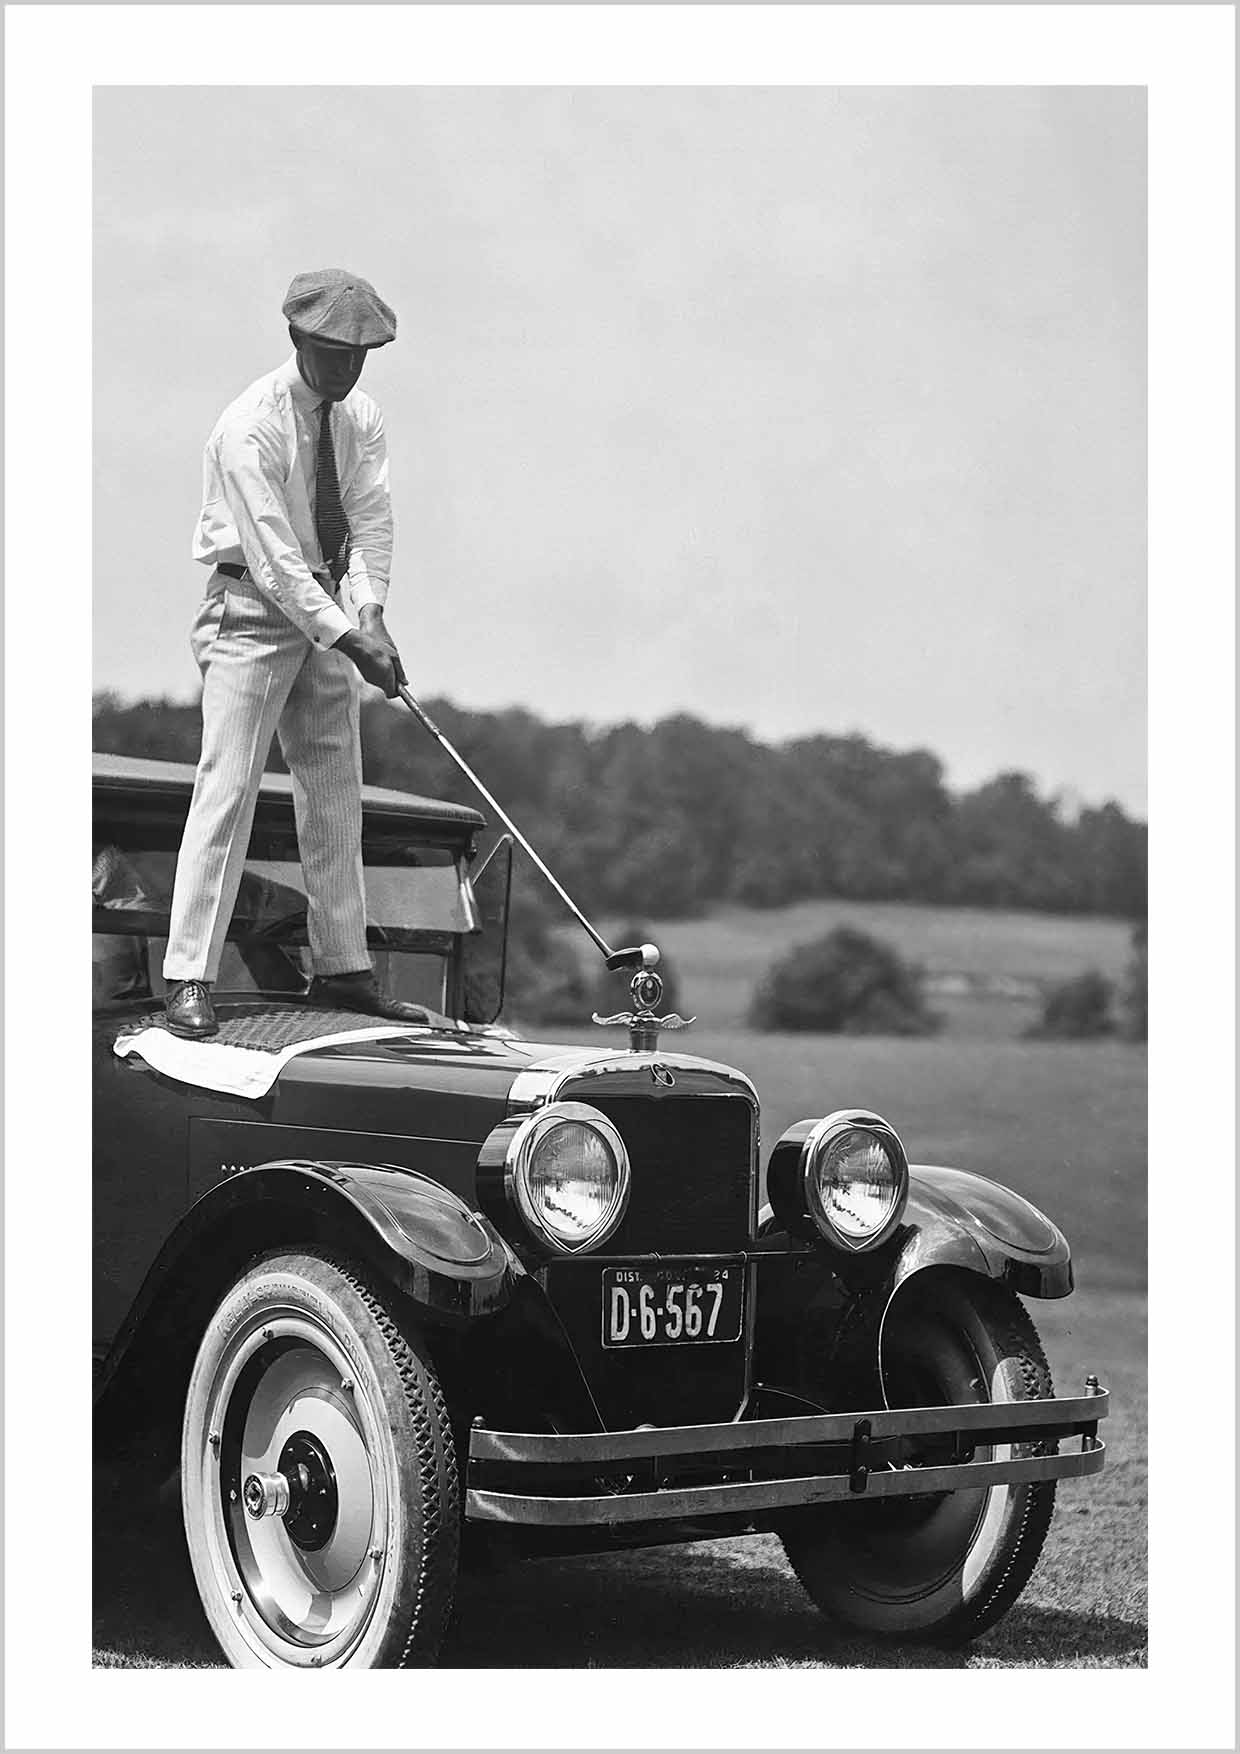 Golfing on top of a car, vintage historic photography 1920s.